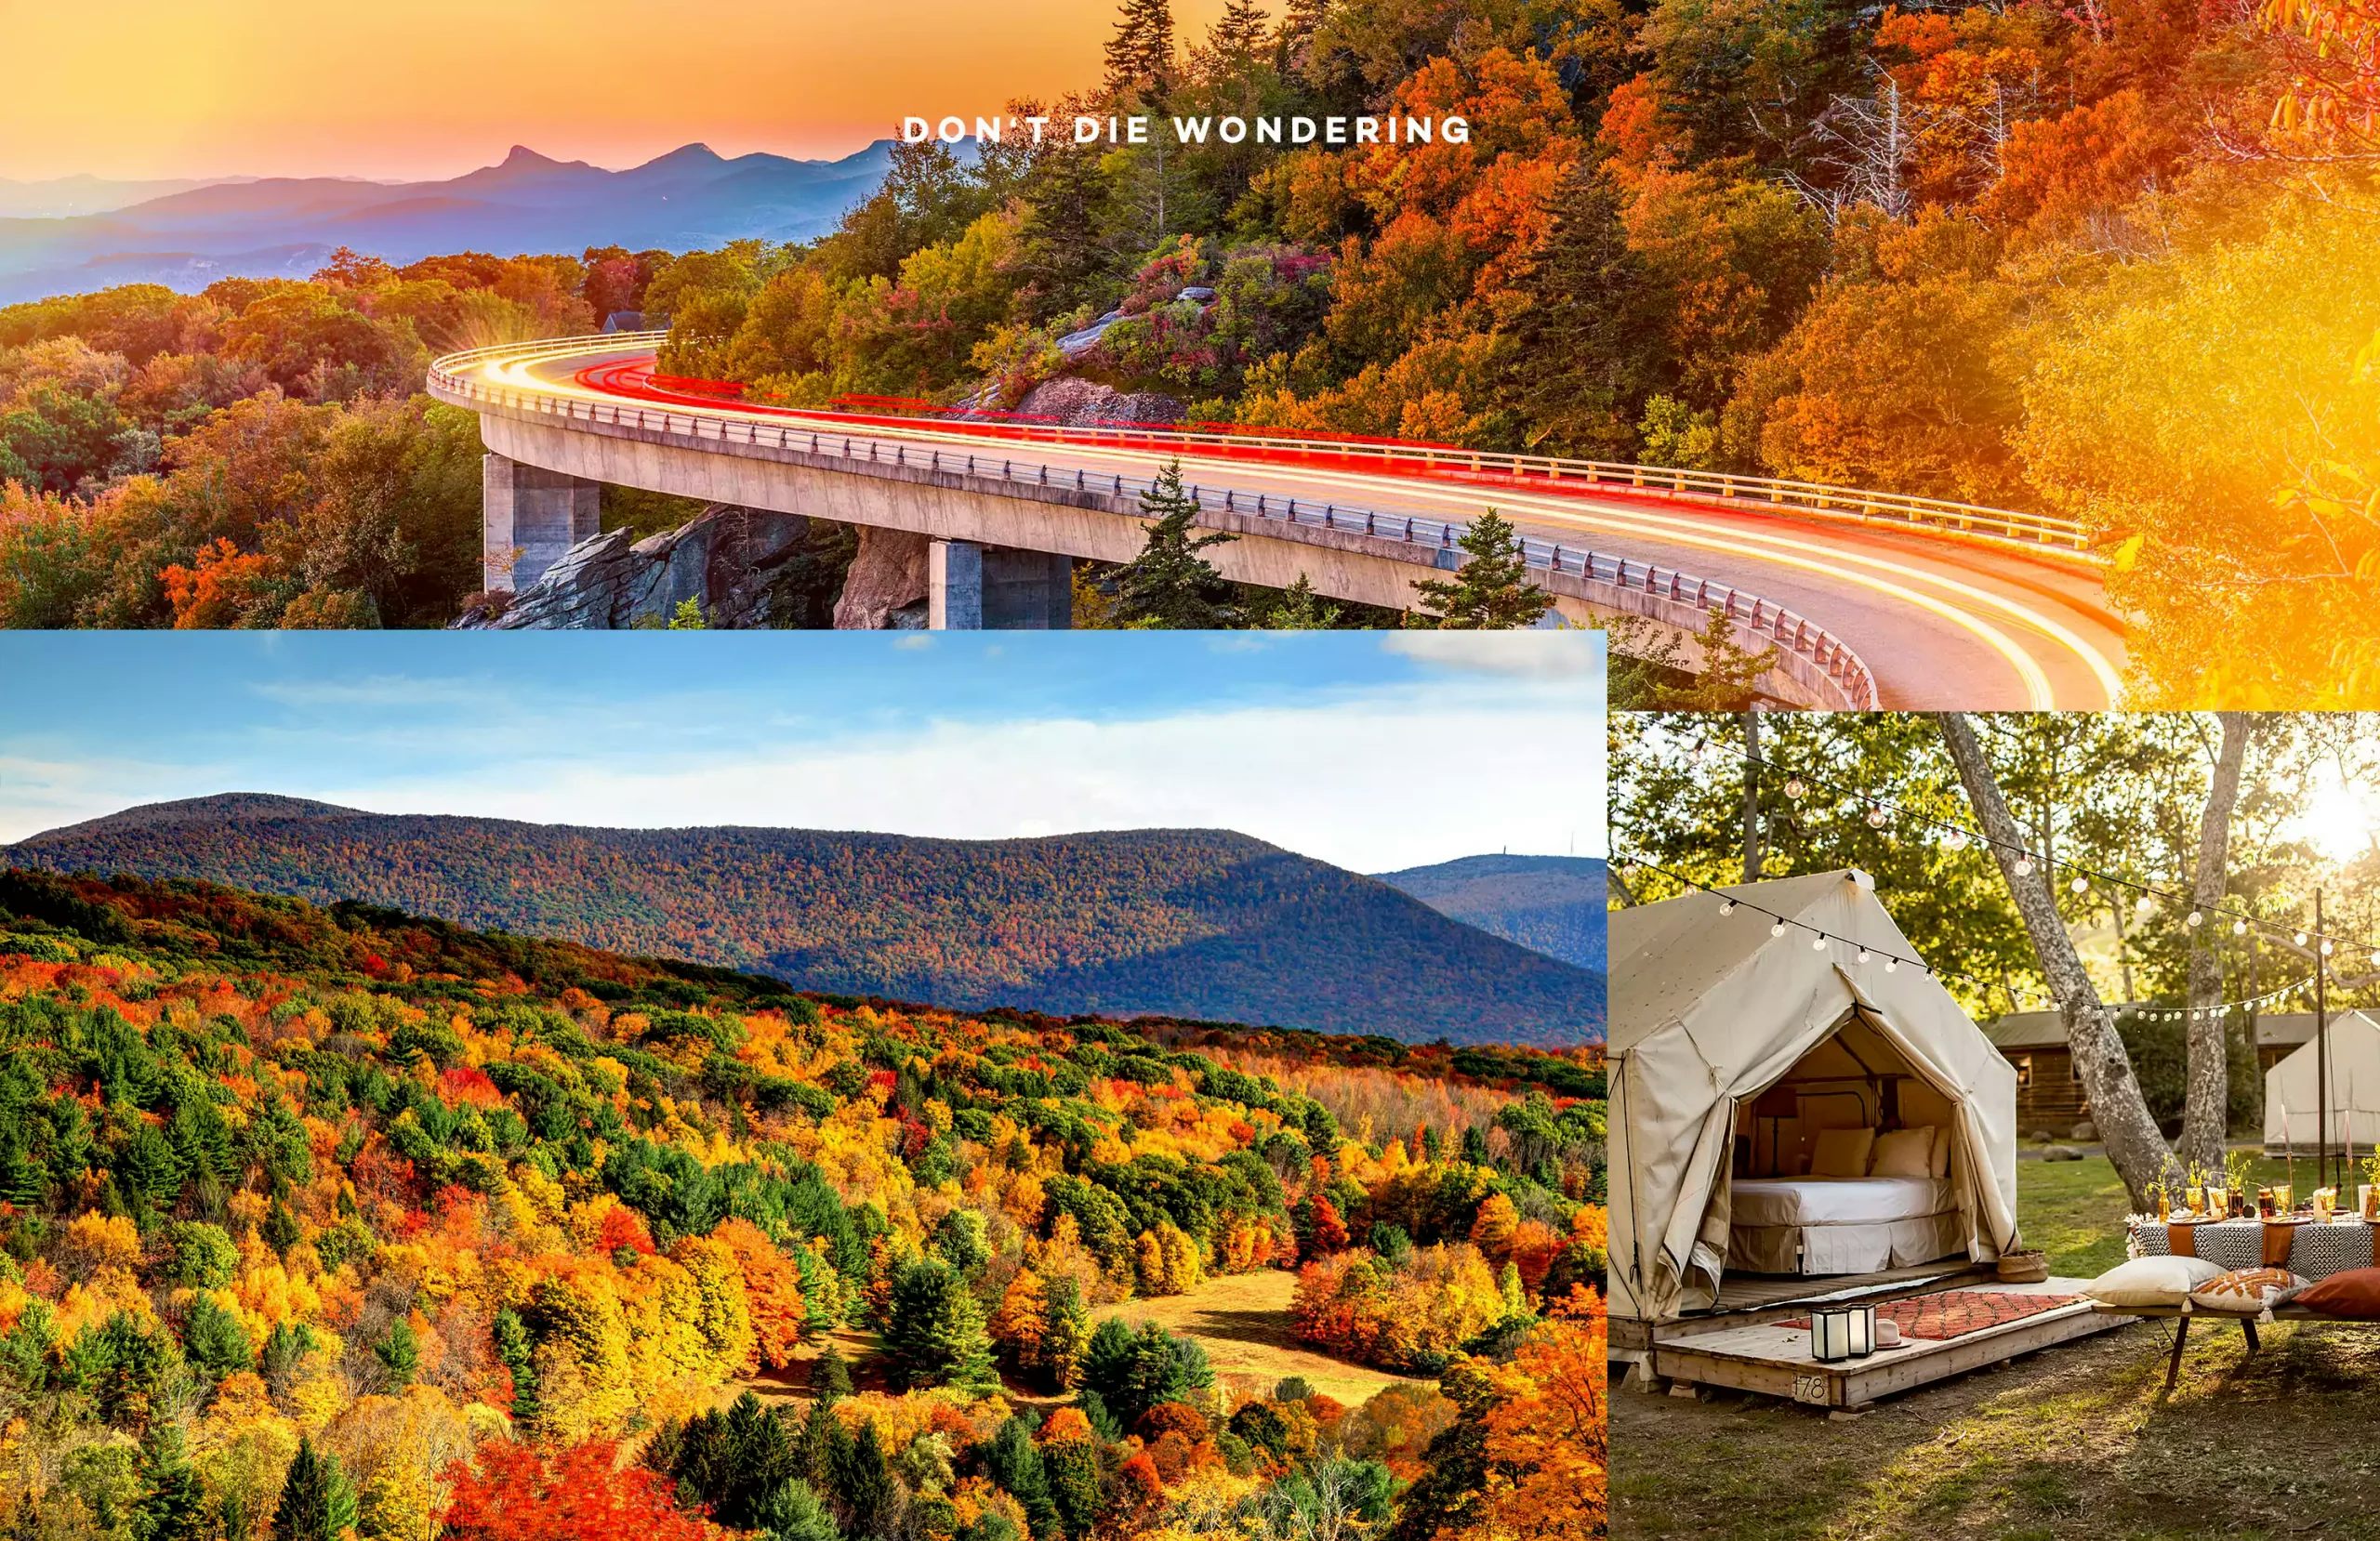 Here Are The Top 5 Glamping Spots To See Fall Foliage 